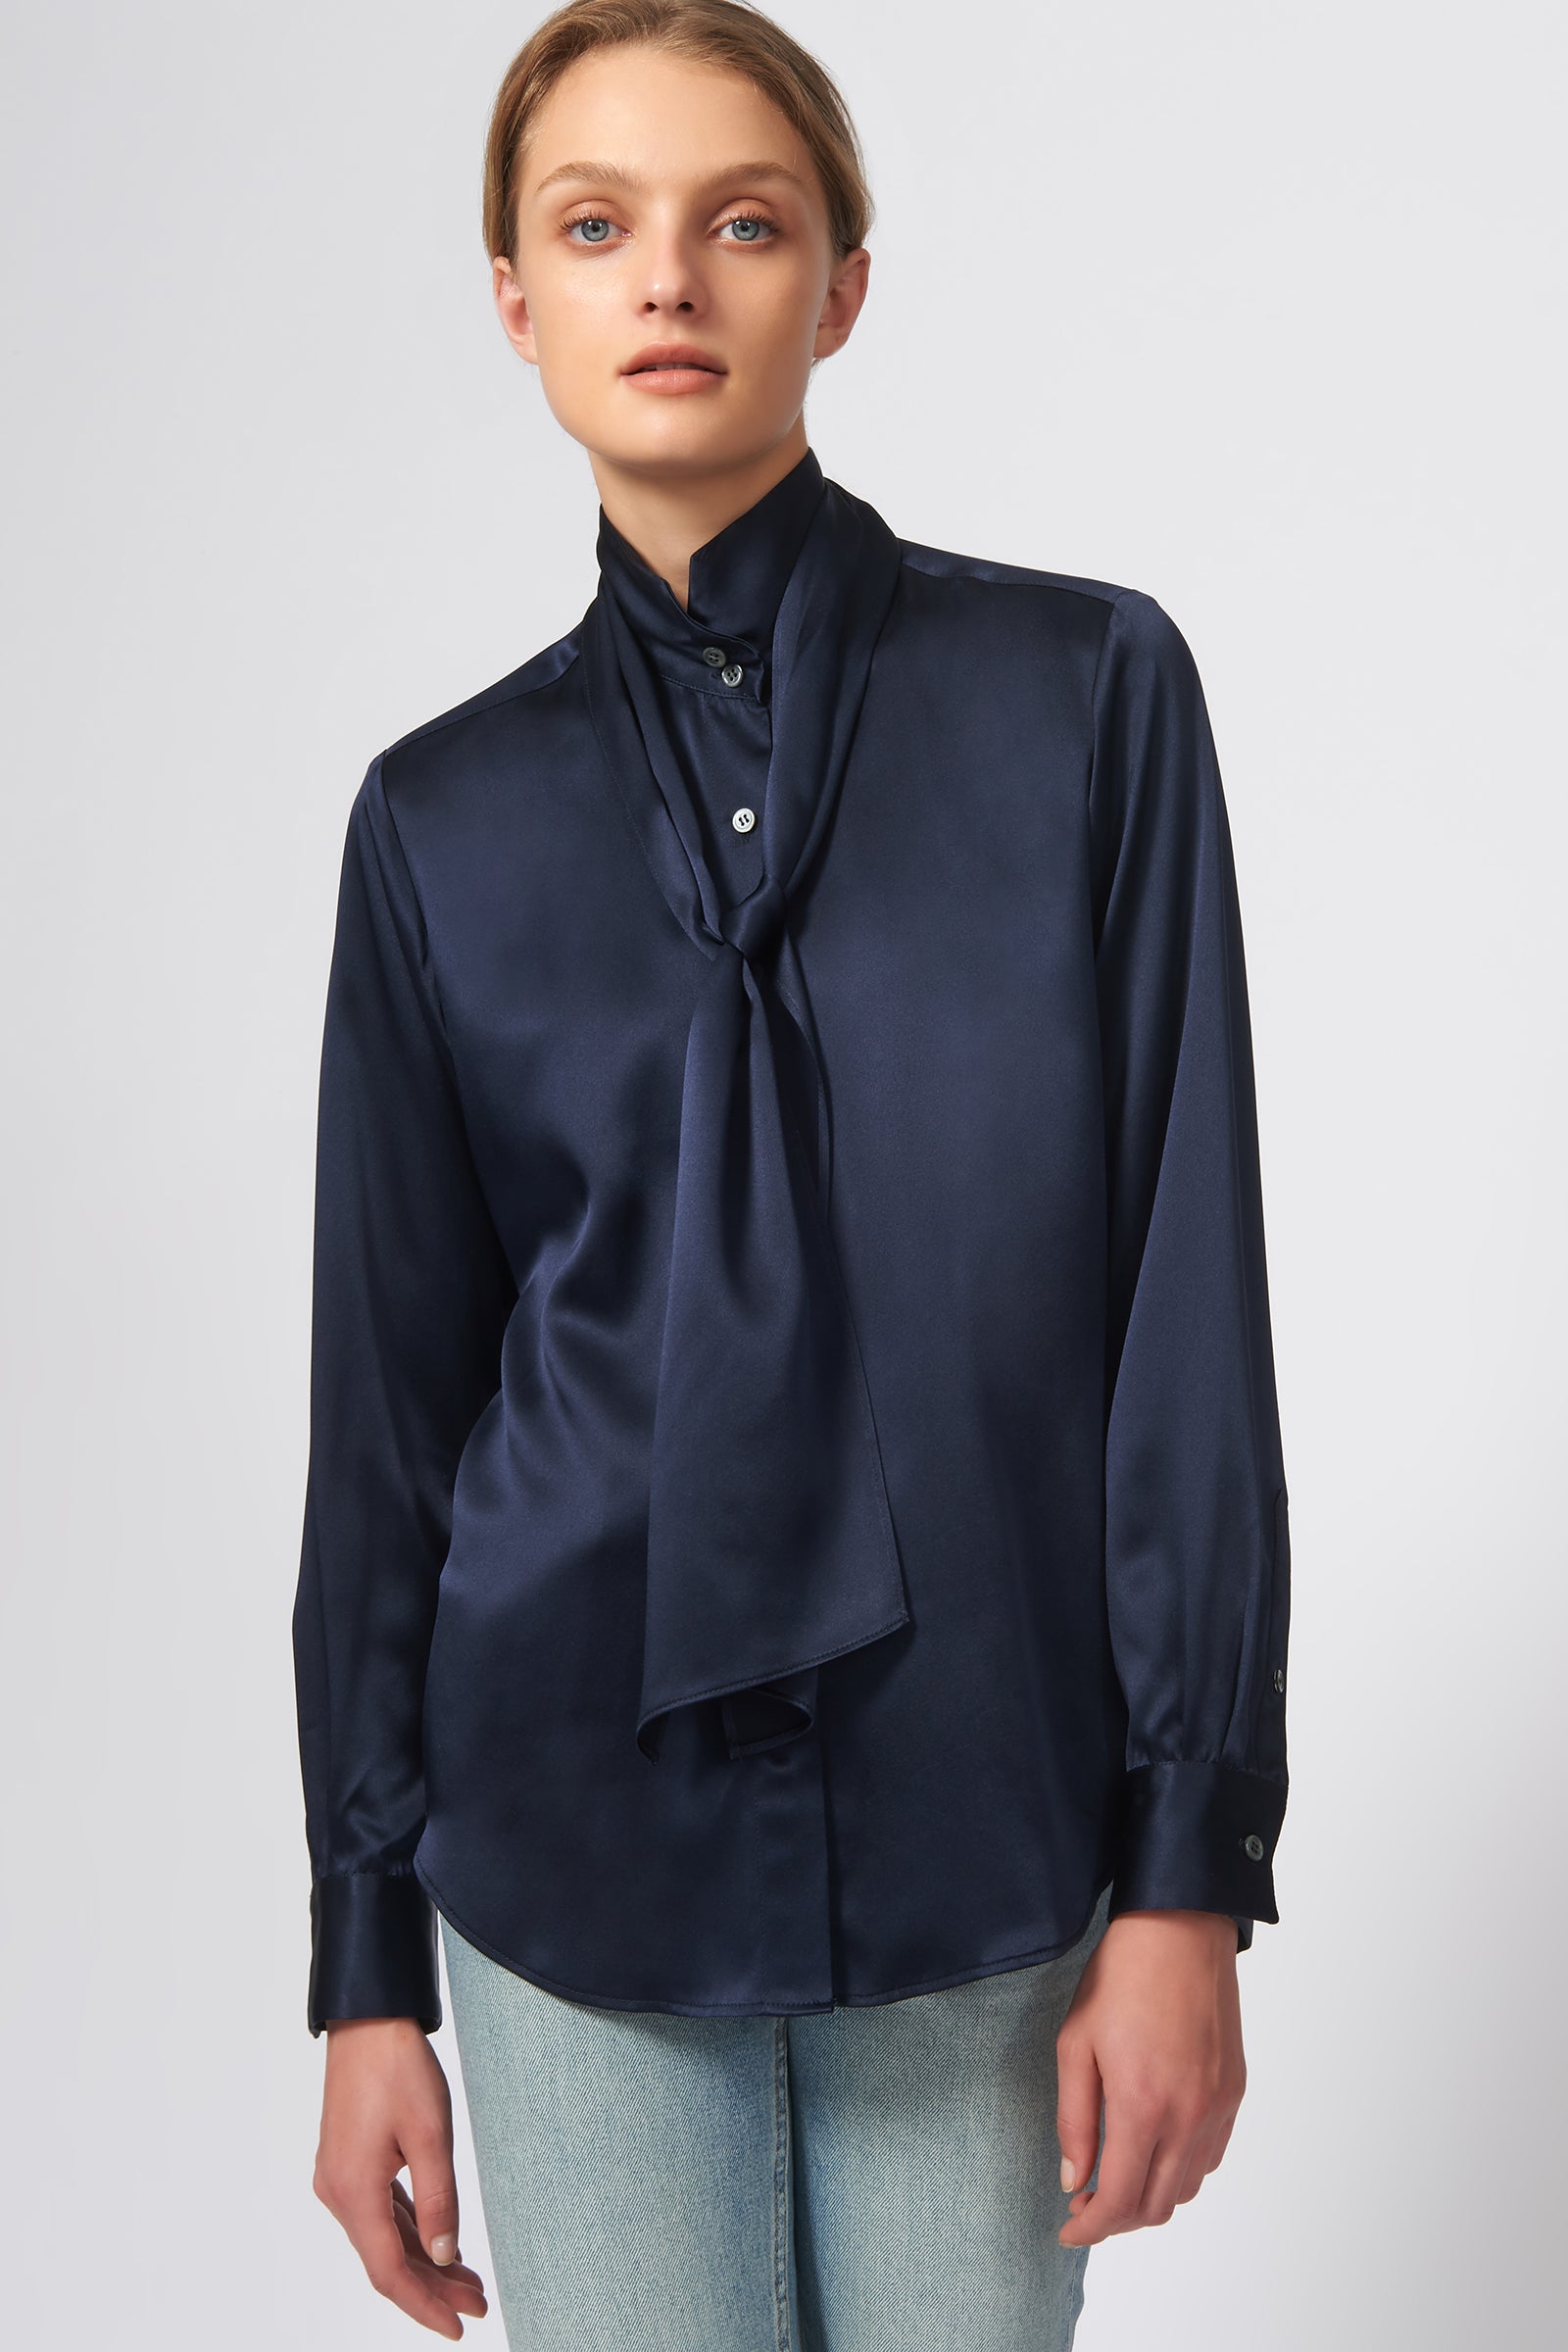 Navy Bow Blouse, Shop The Largest Collection